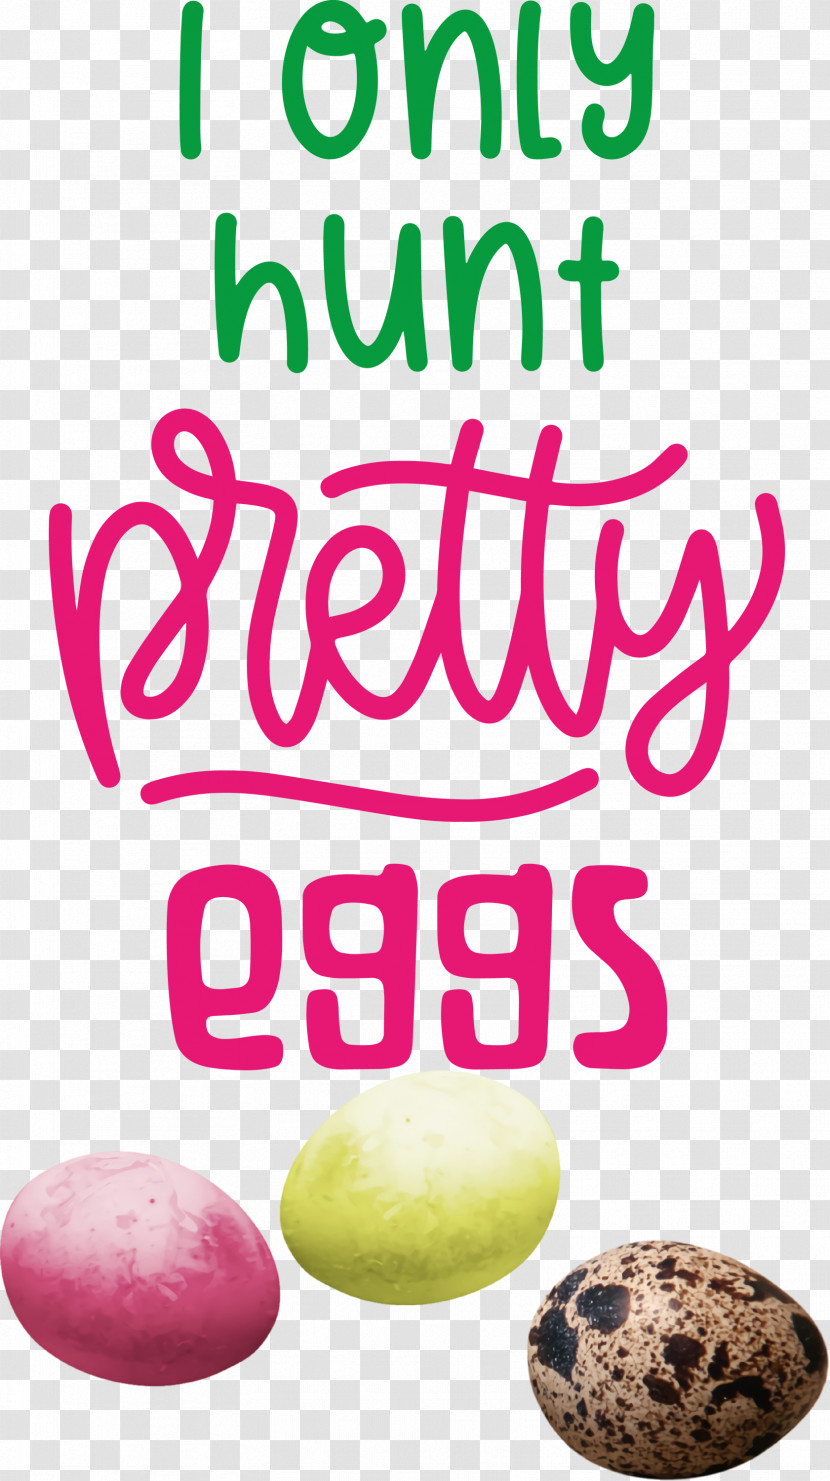 Hunt Pretty Eggs Egg Easter Day Transparent PNG